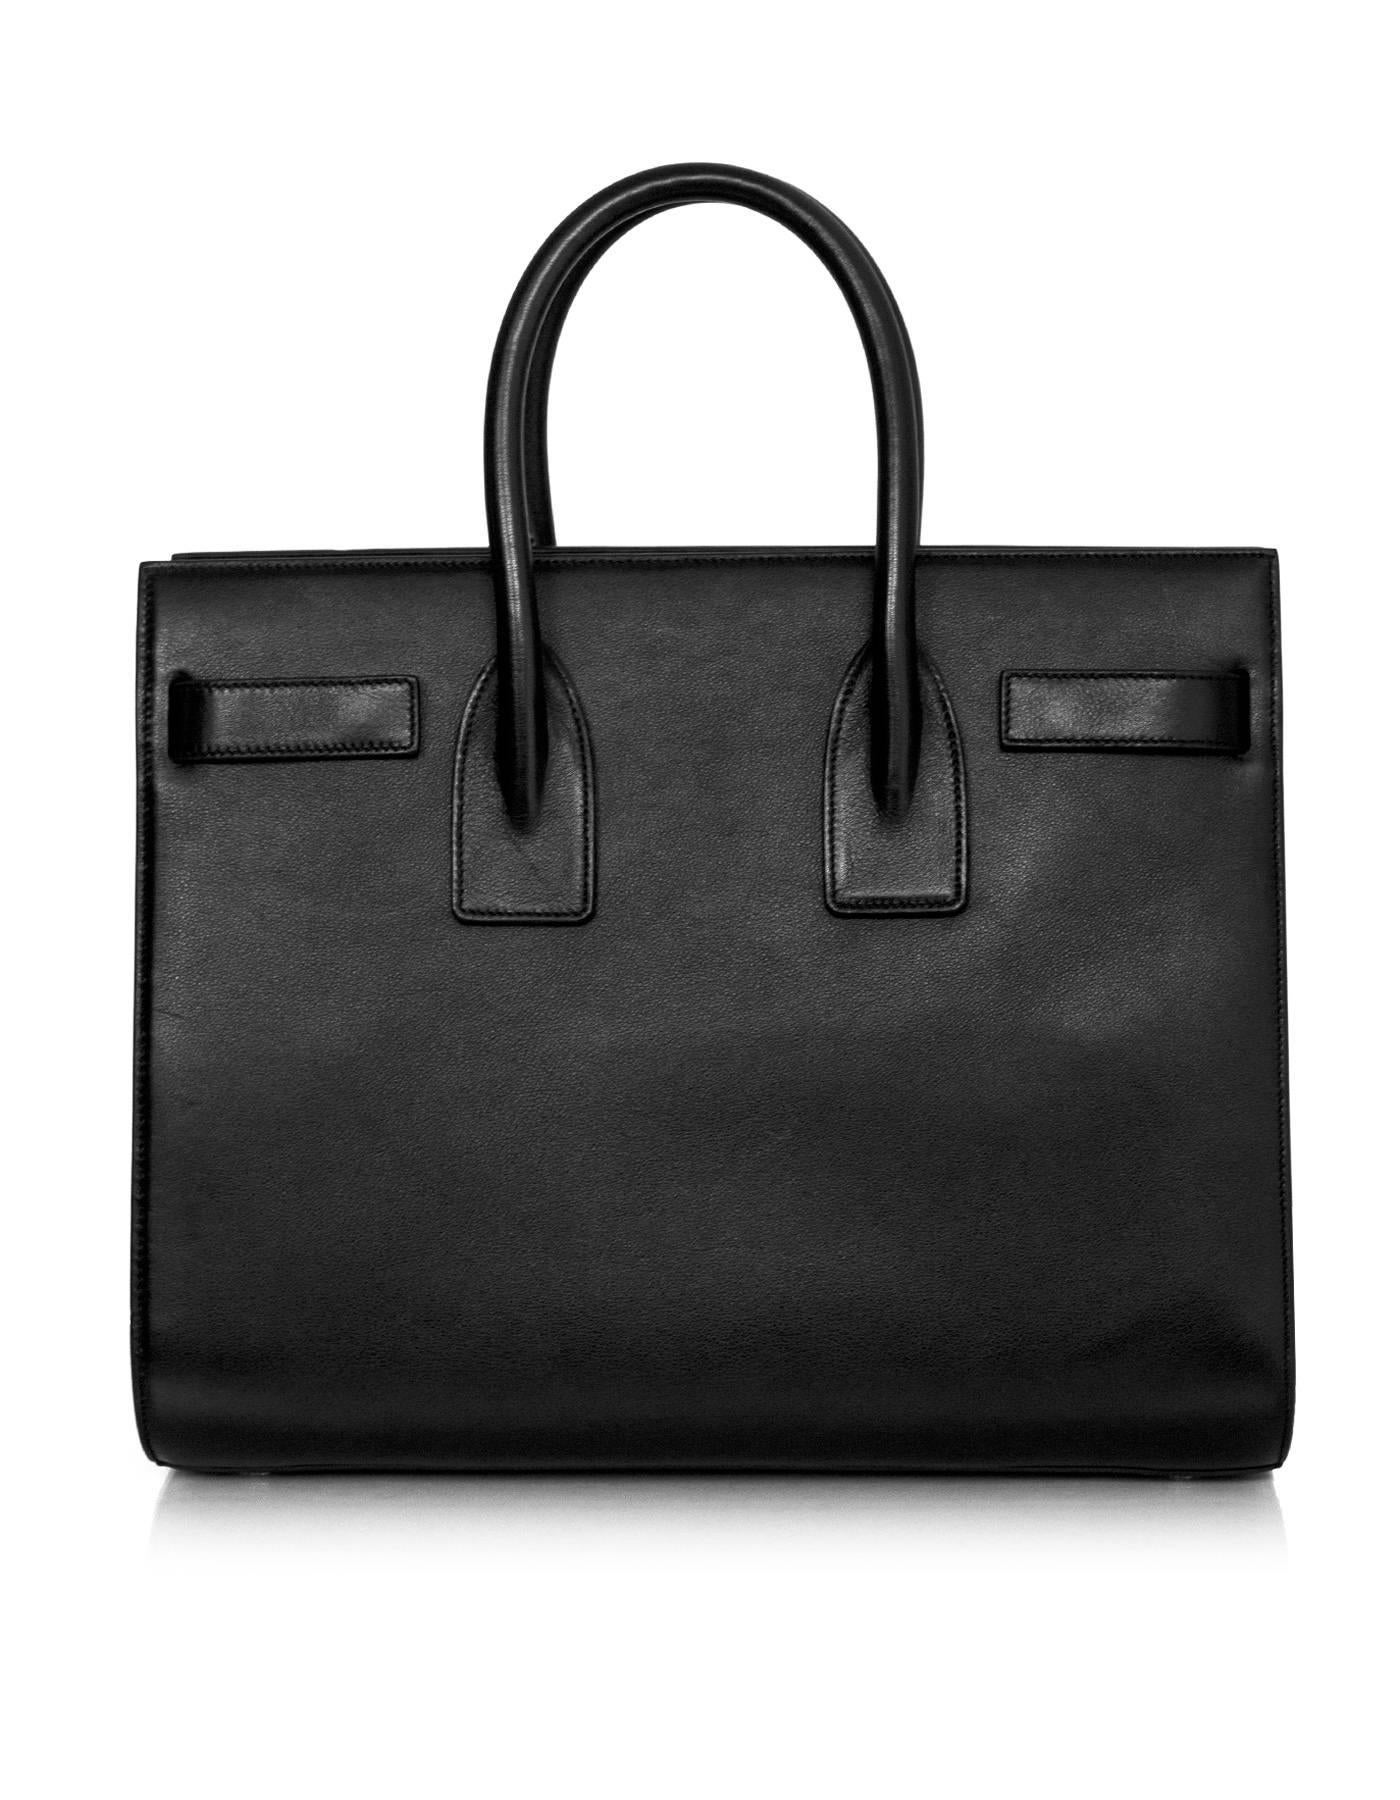 8/9 Saint Laurent Black Calfskin Small Sac De Jour Bag In Excellent Condition In New York, NY